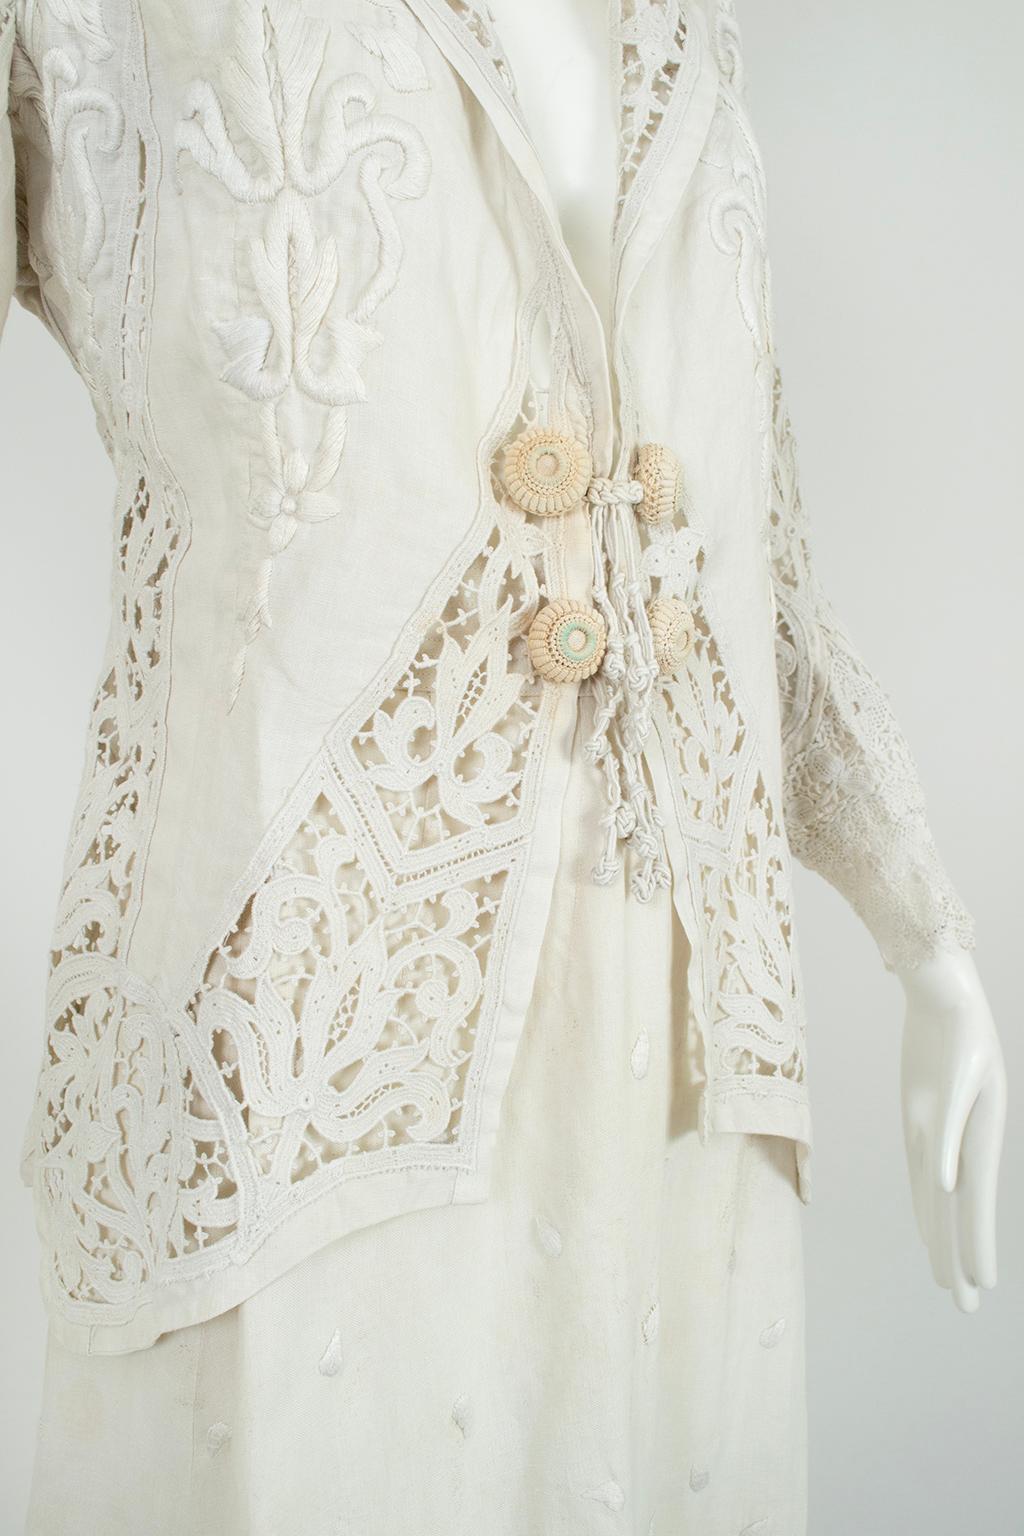 Edwardian White Irish Crochet and Cotton Walking or Wedding Suit – L, 1900s For Sale 3